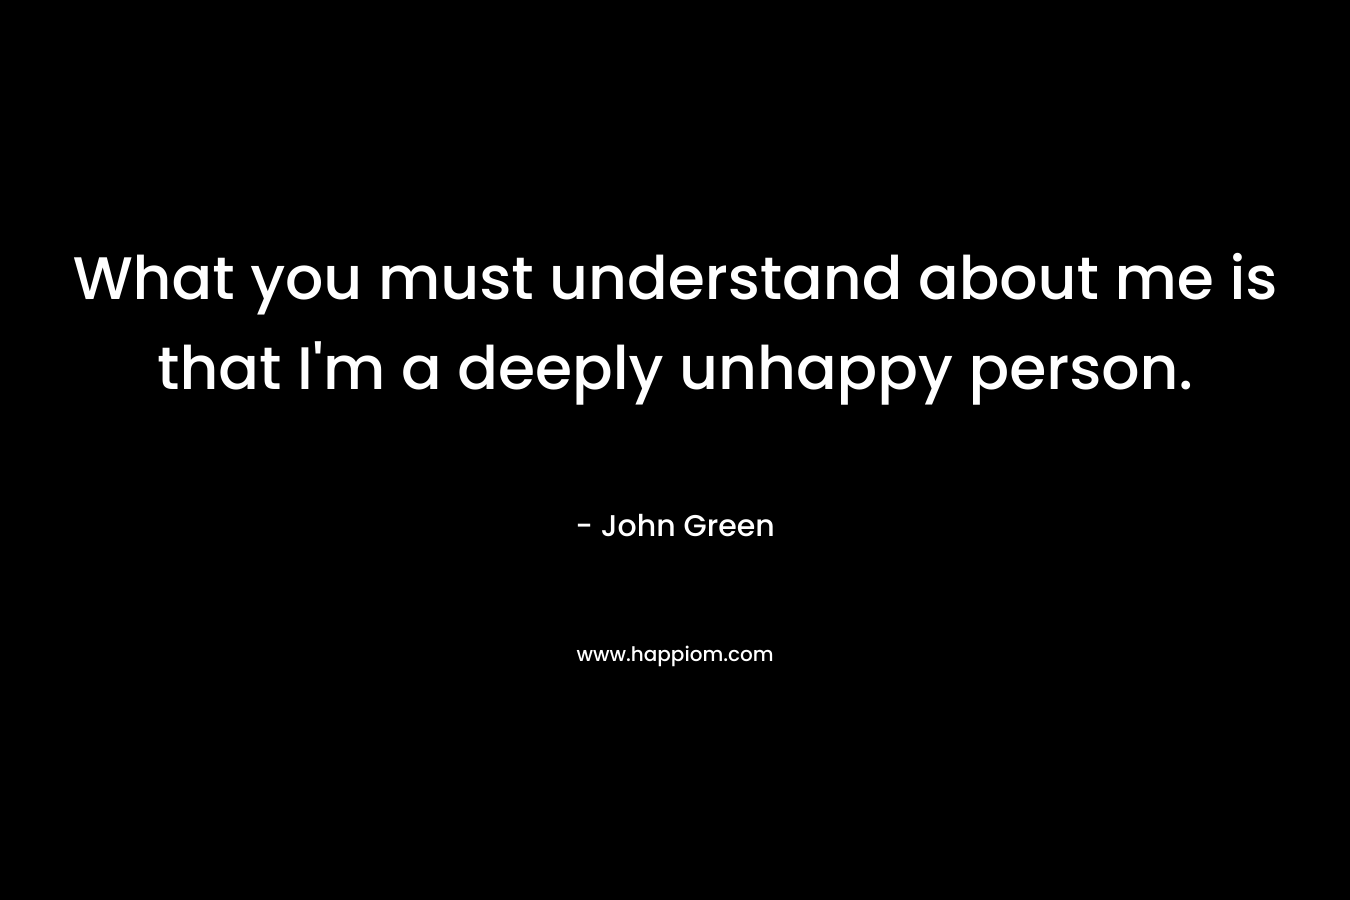 What you must understand about me is that I'm a deeply unhappy person.